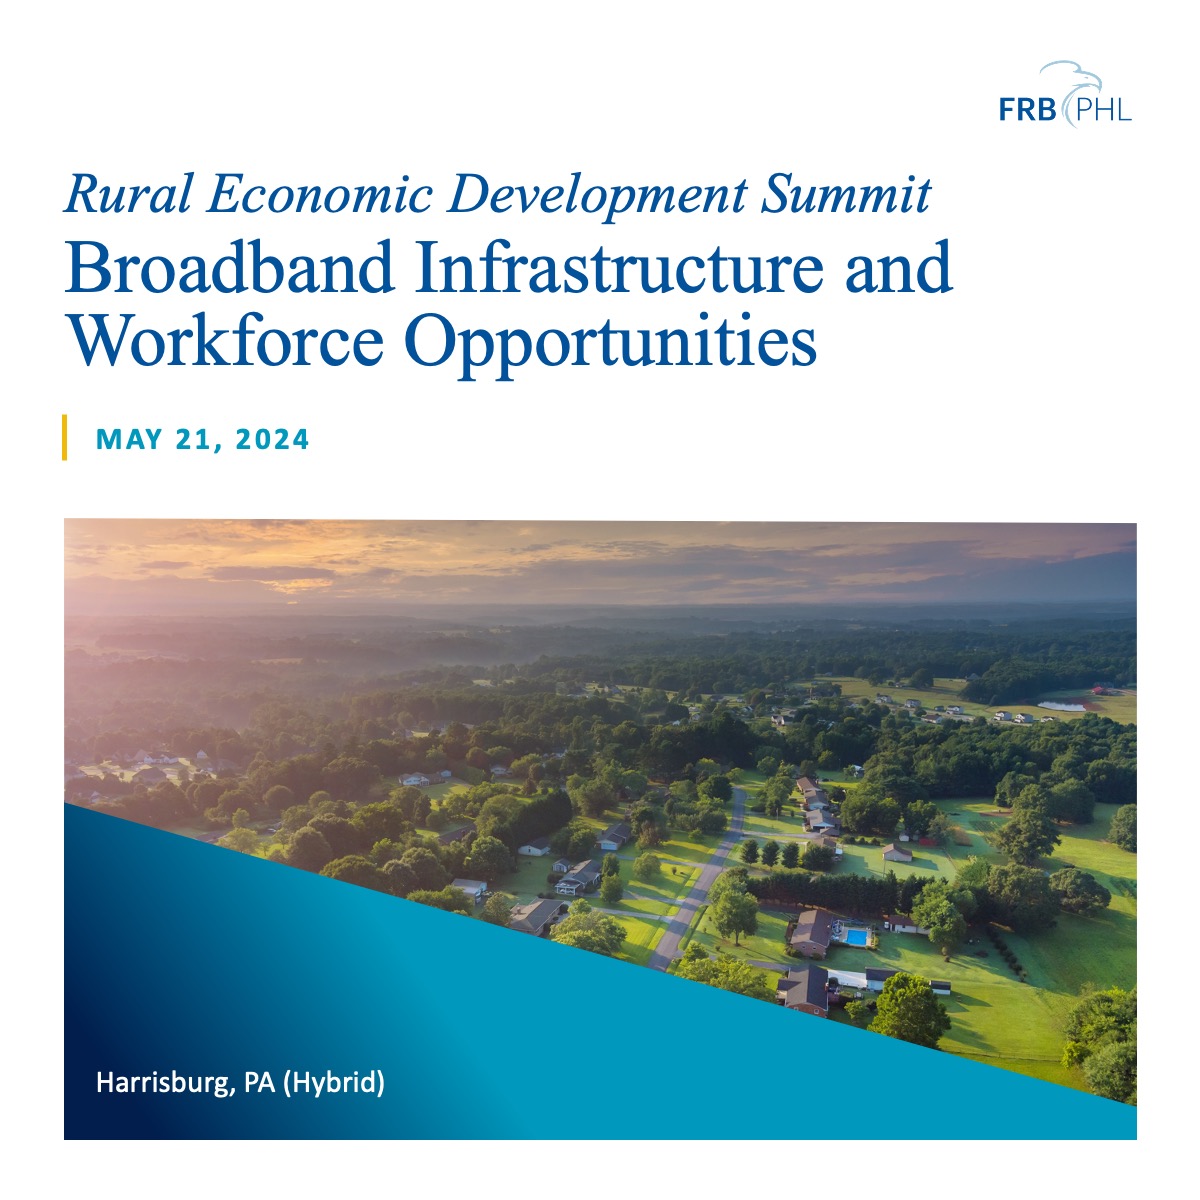 Broadband infrastructure is crucial for rural communities in today's digital economy. But a shortage of skilled workers to build and maintain broadband infrastructure poses a significant challenge. Join us on May 21 for a timely discussion on this topic. bit.ly/3wglMsx